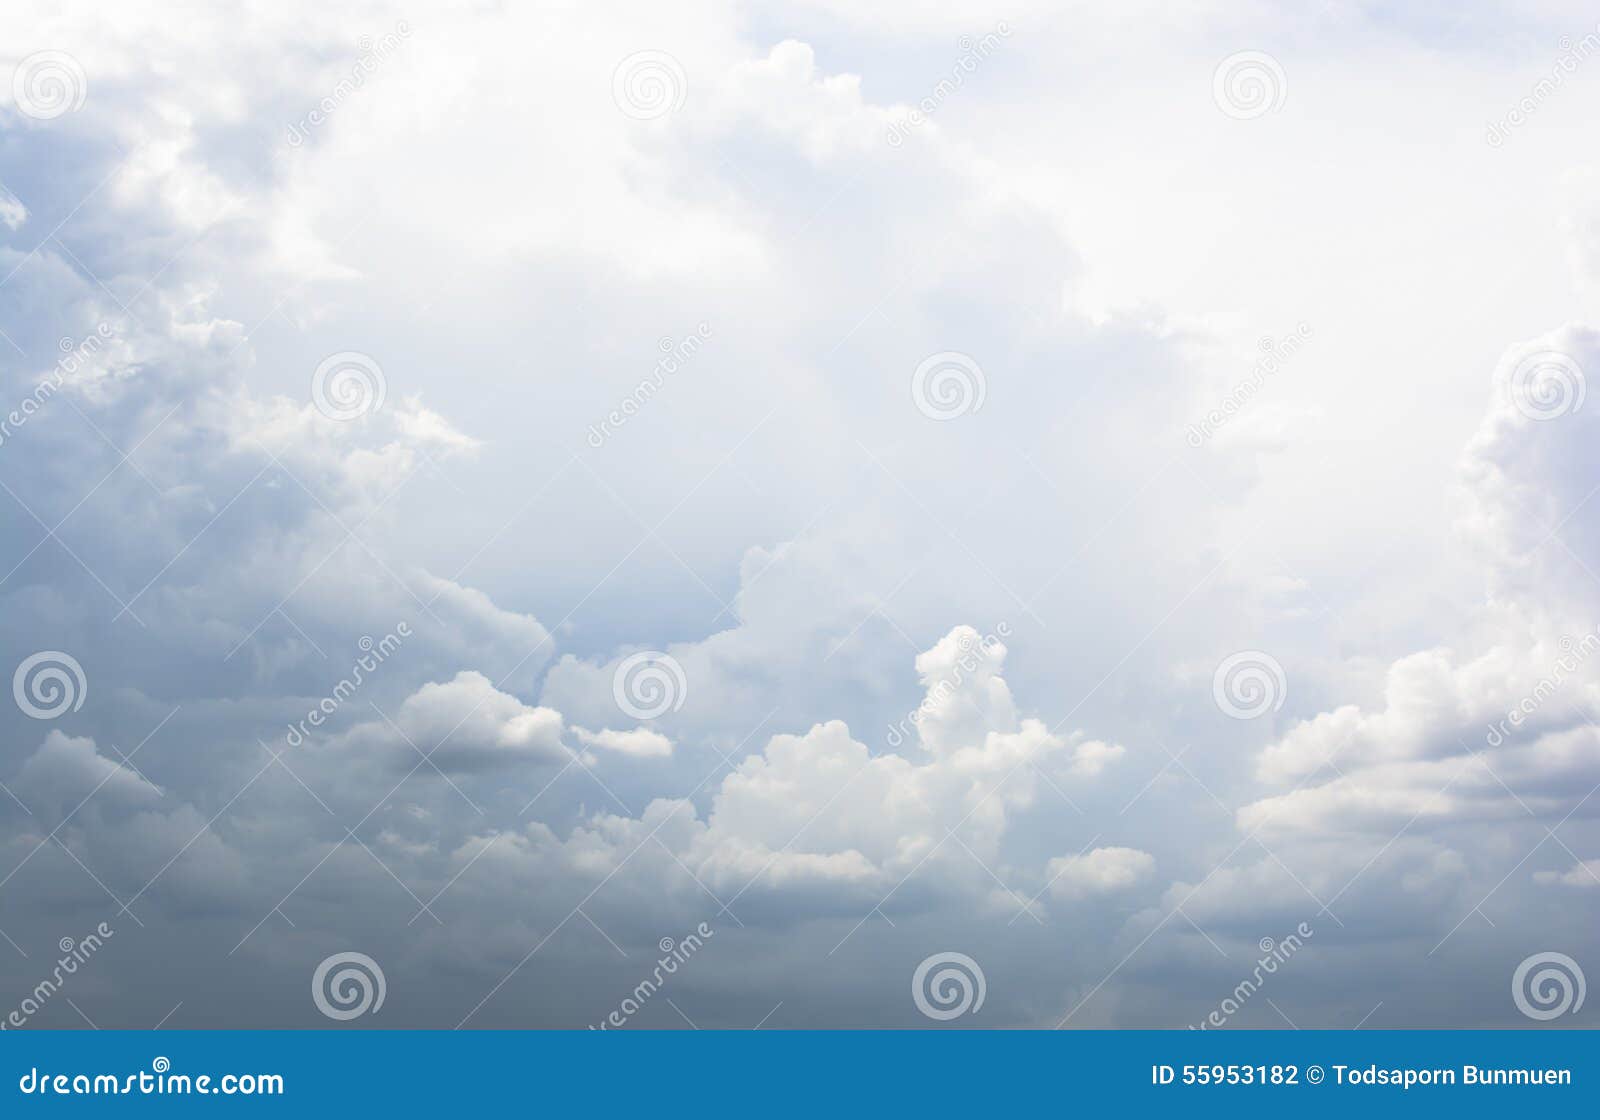 partly cloudy sky